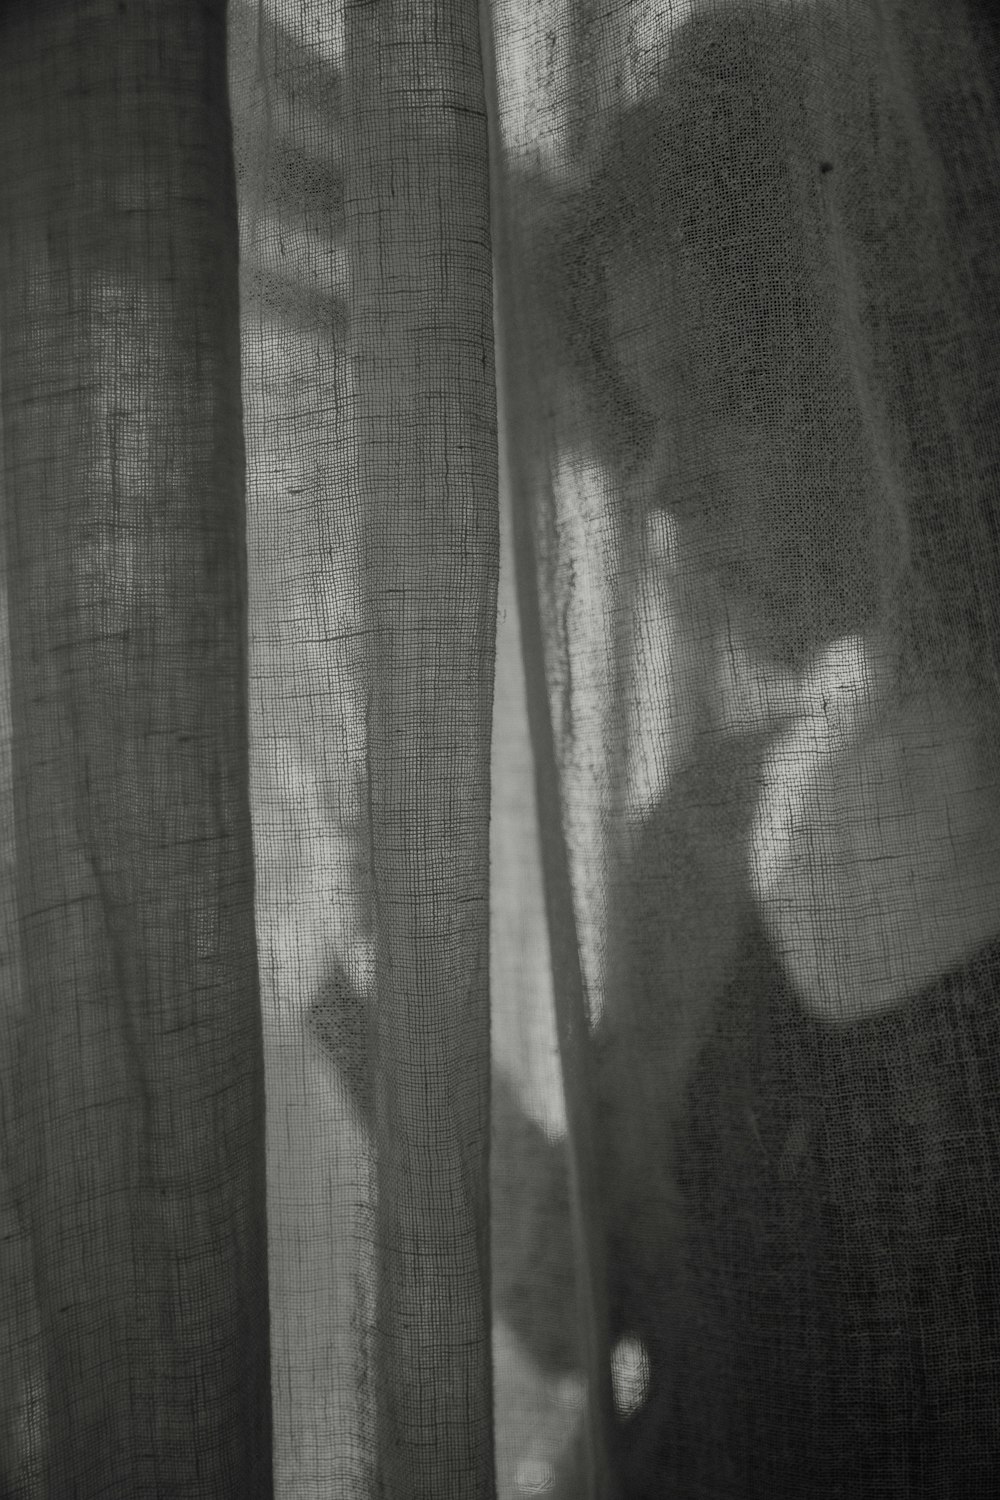 grayscale photo of a person standing in front of a window curtain